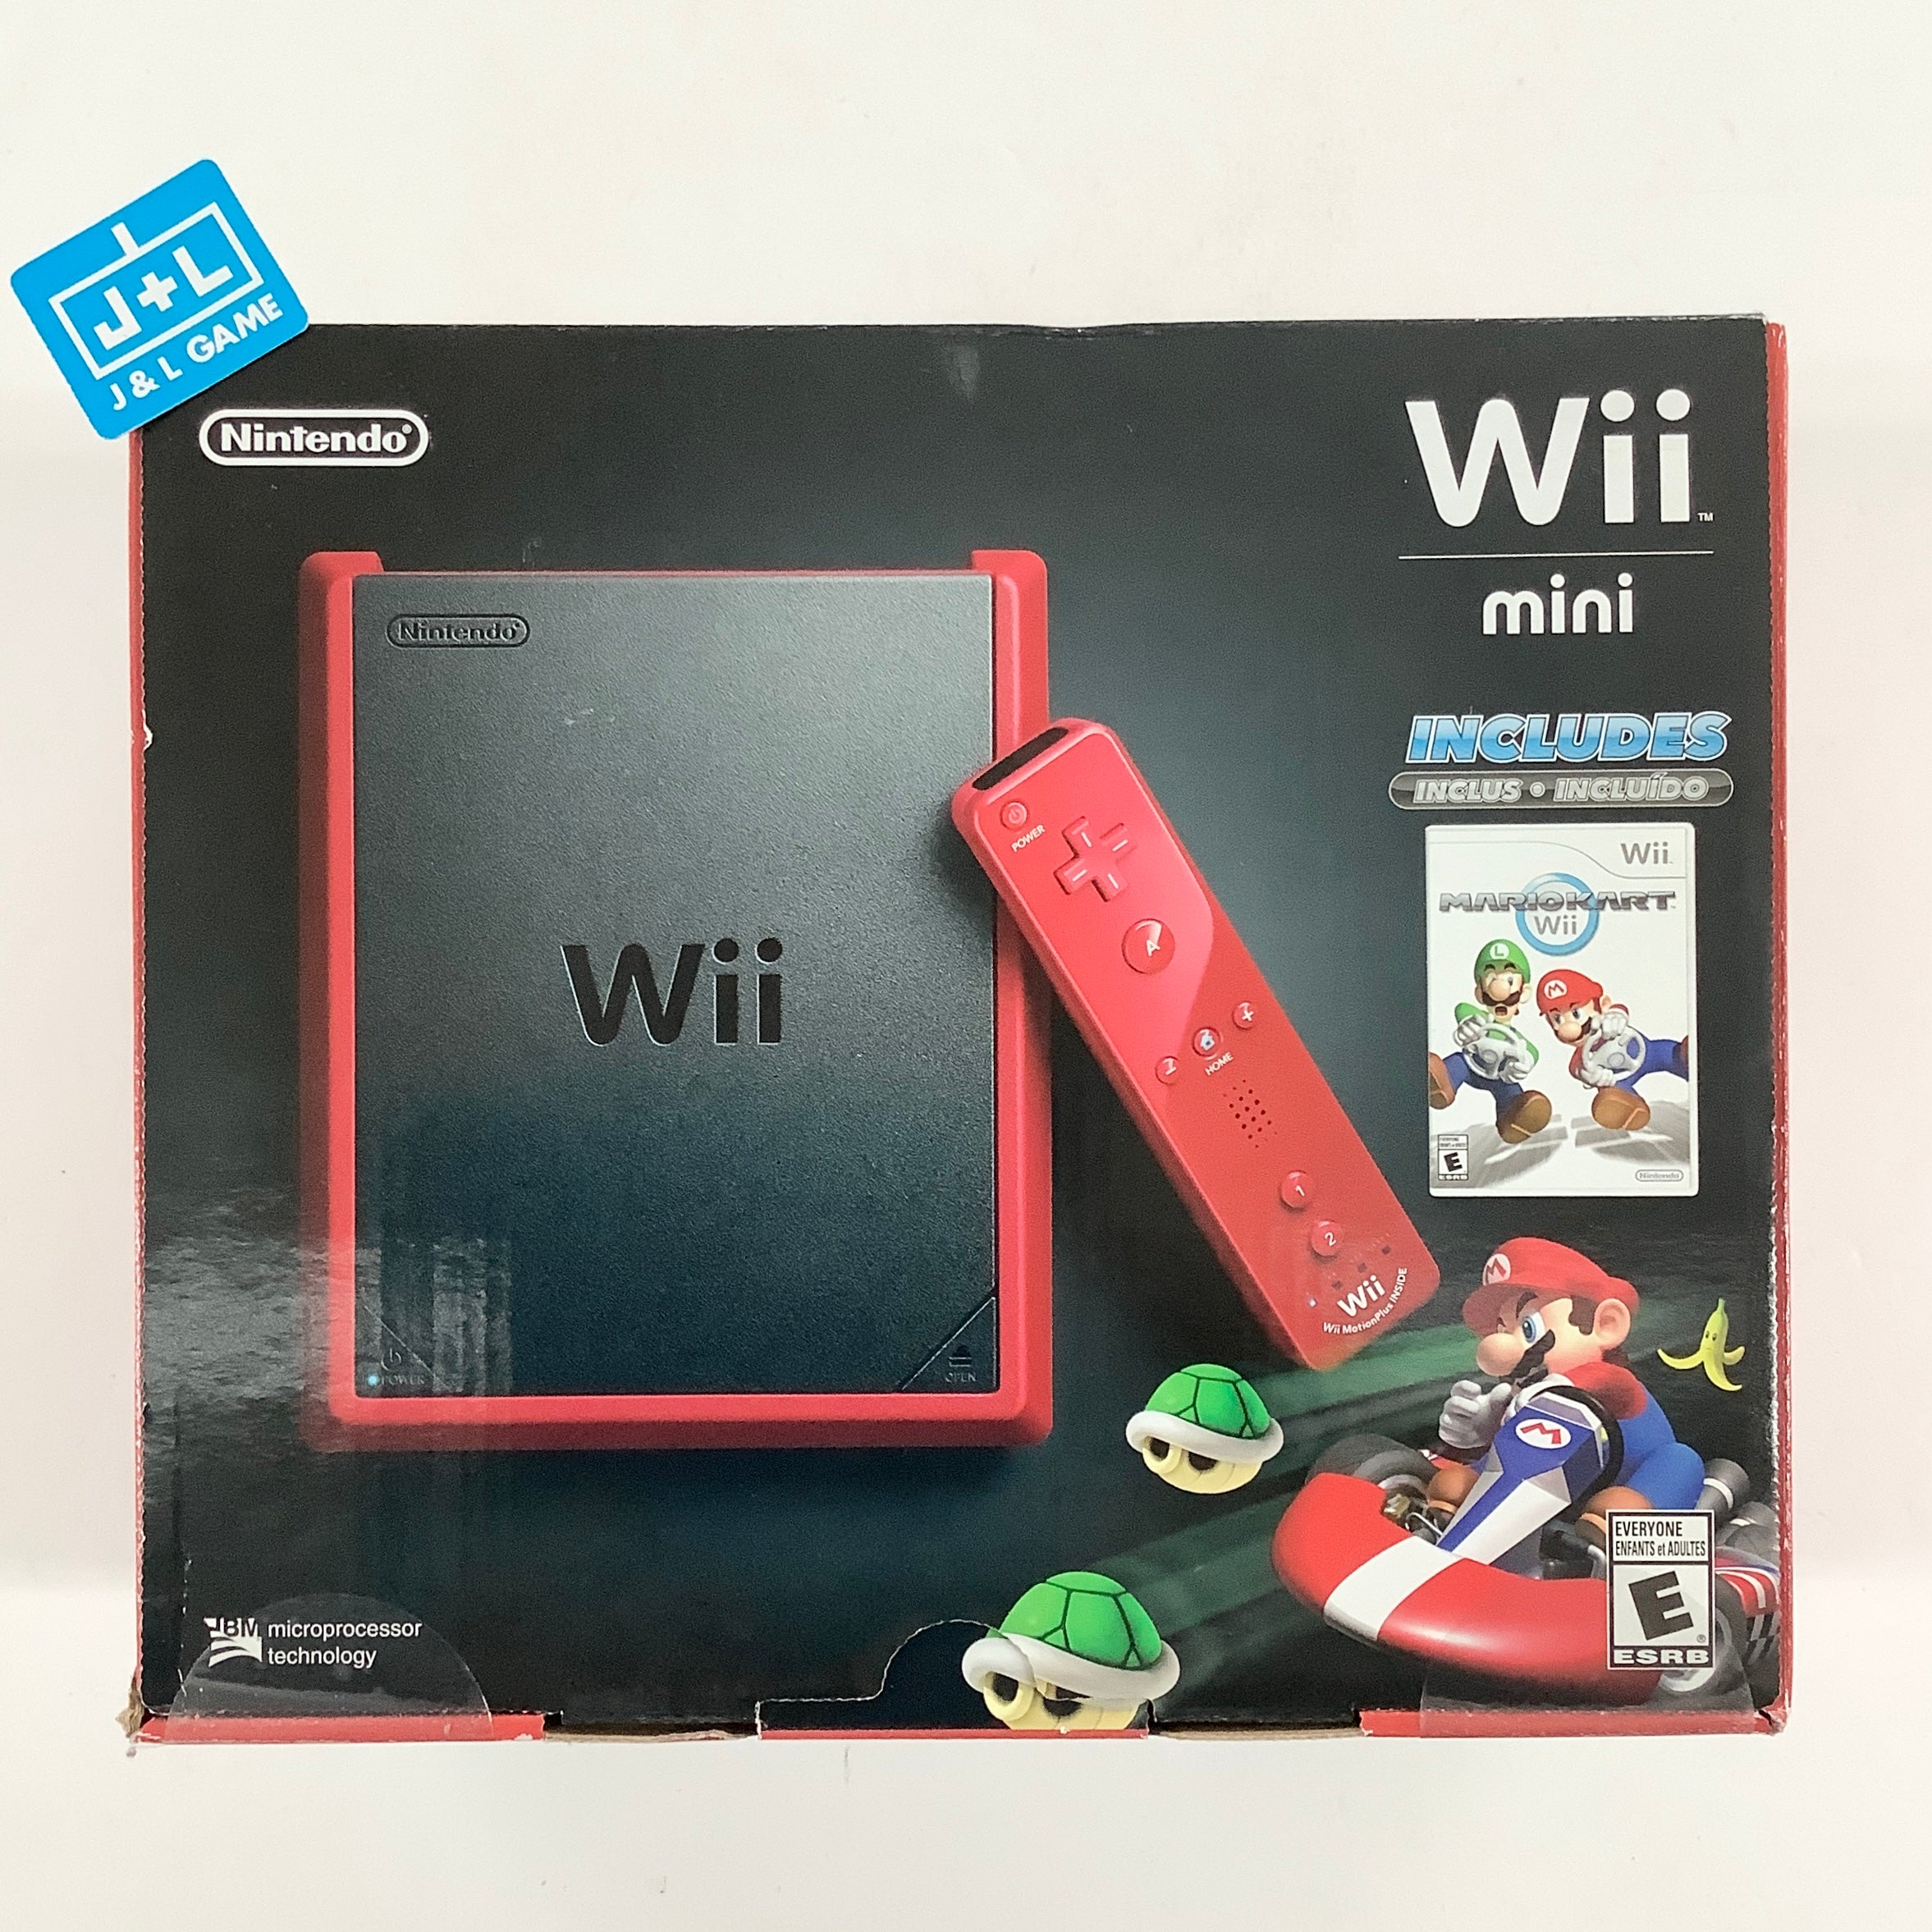  Wii Mini with Mario Kart Wii Game - Red (Renewed) : Video Games